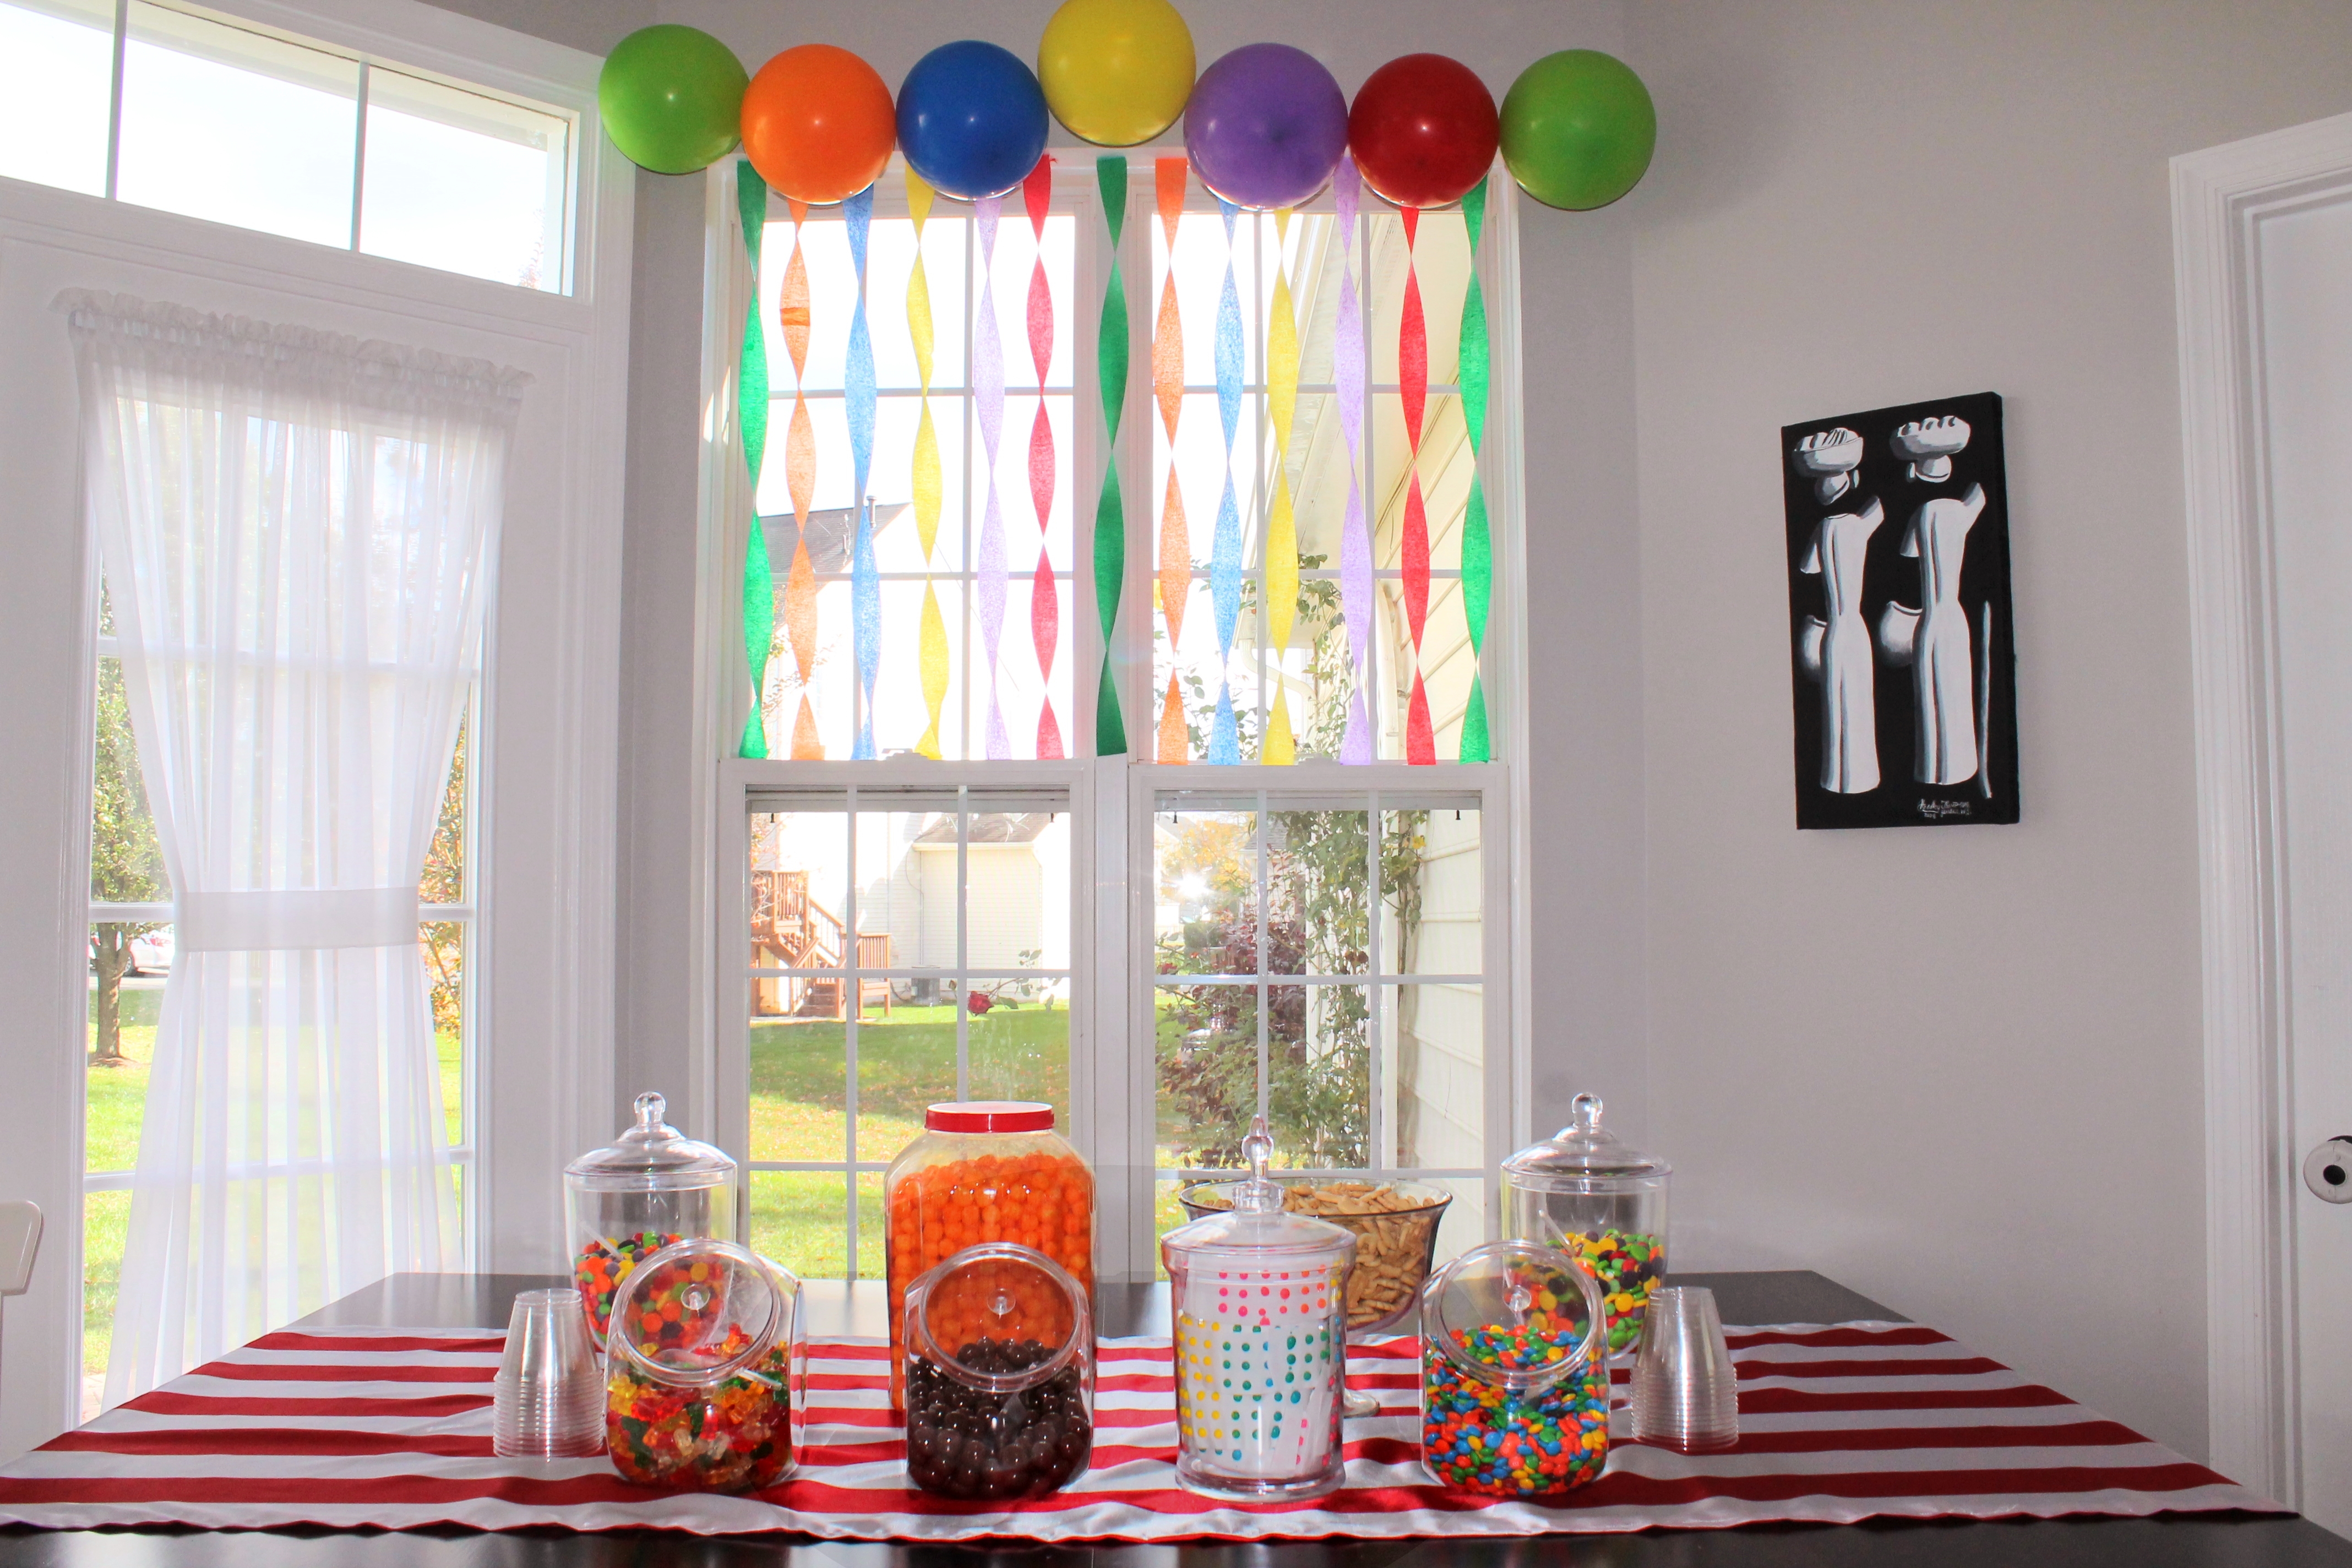 Candy/Snack Buffet